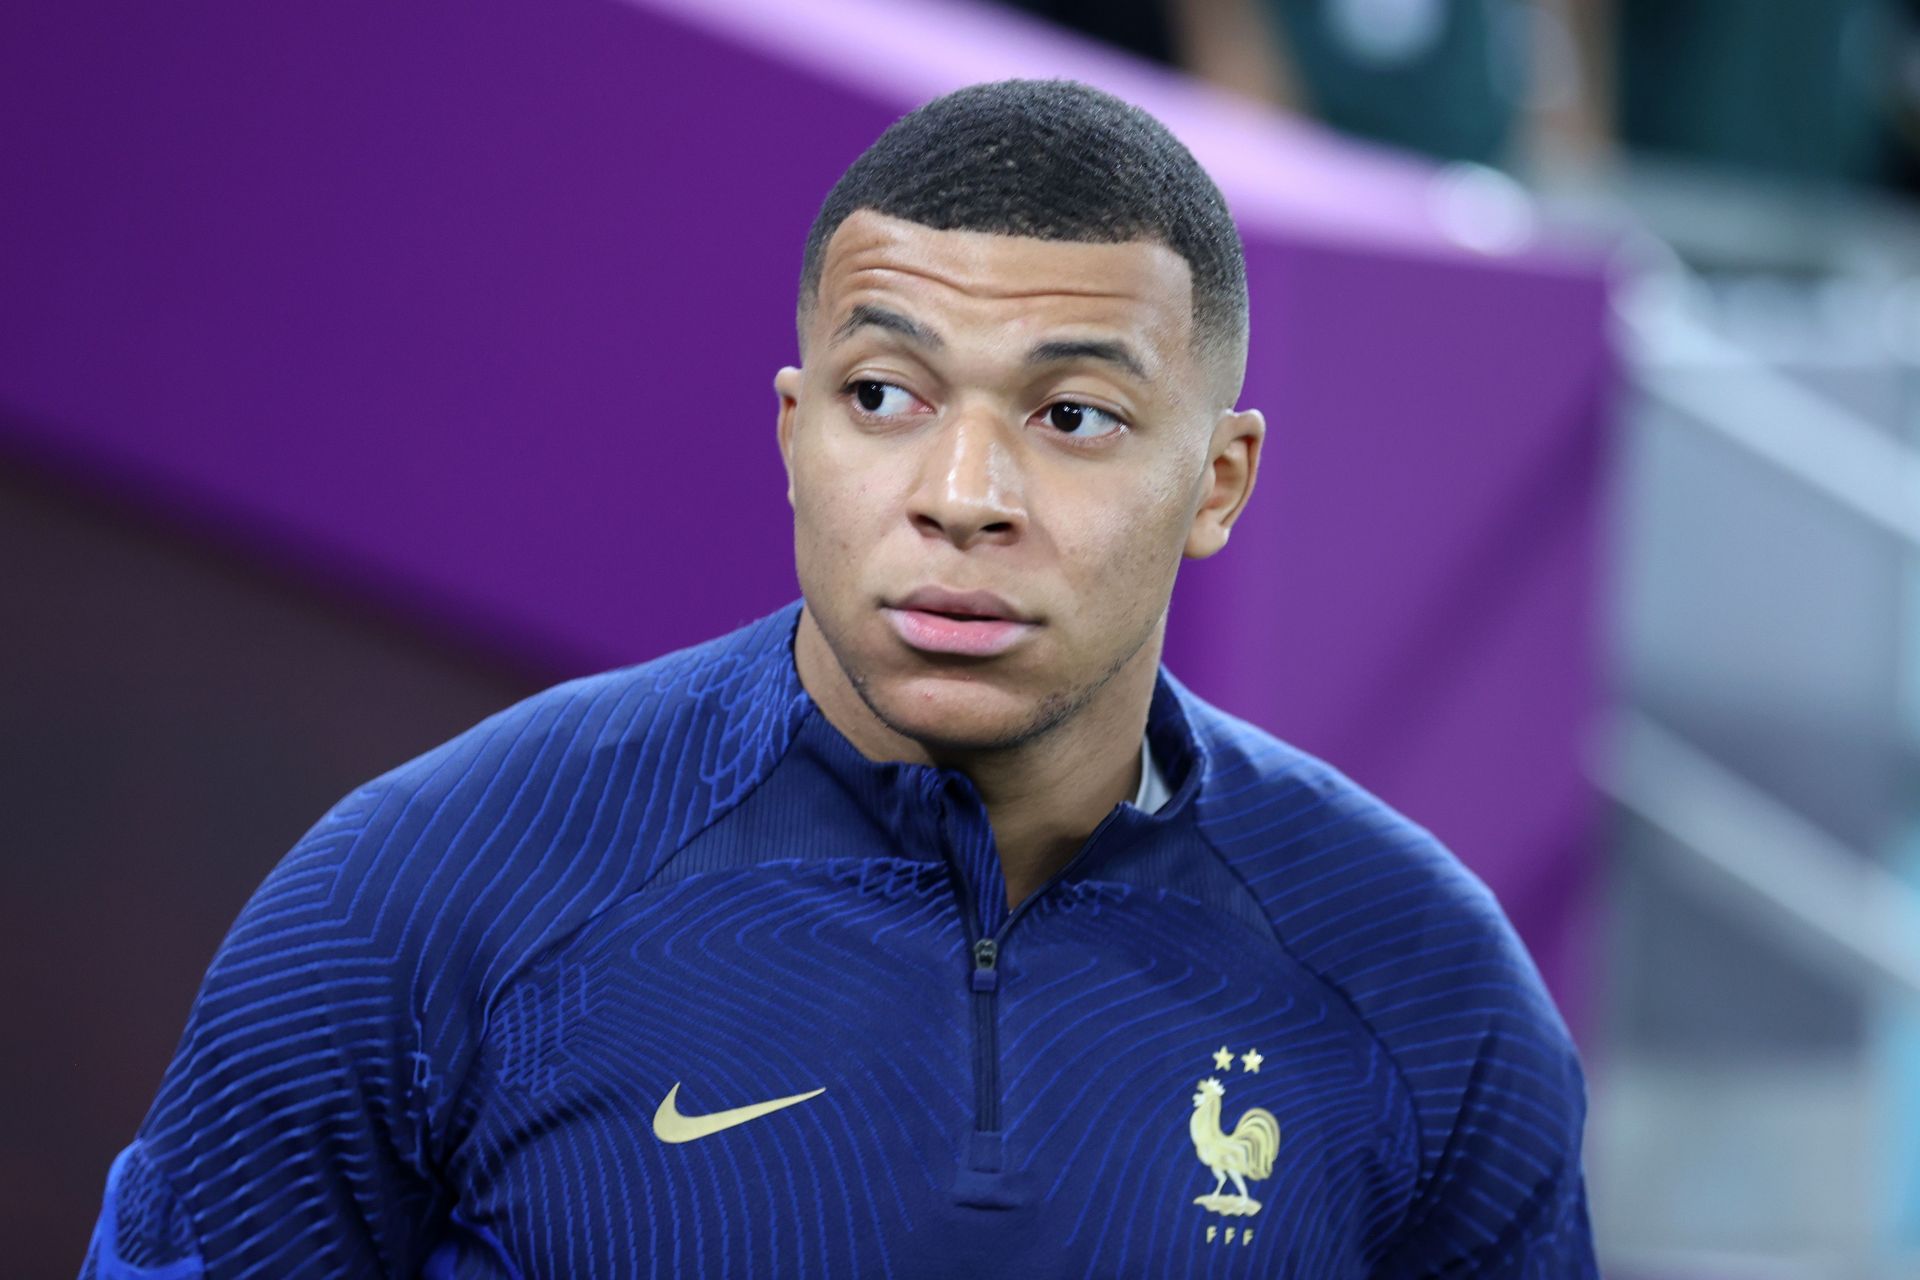 Kylian Mbappe is in sensational form and back in training